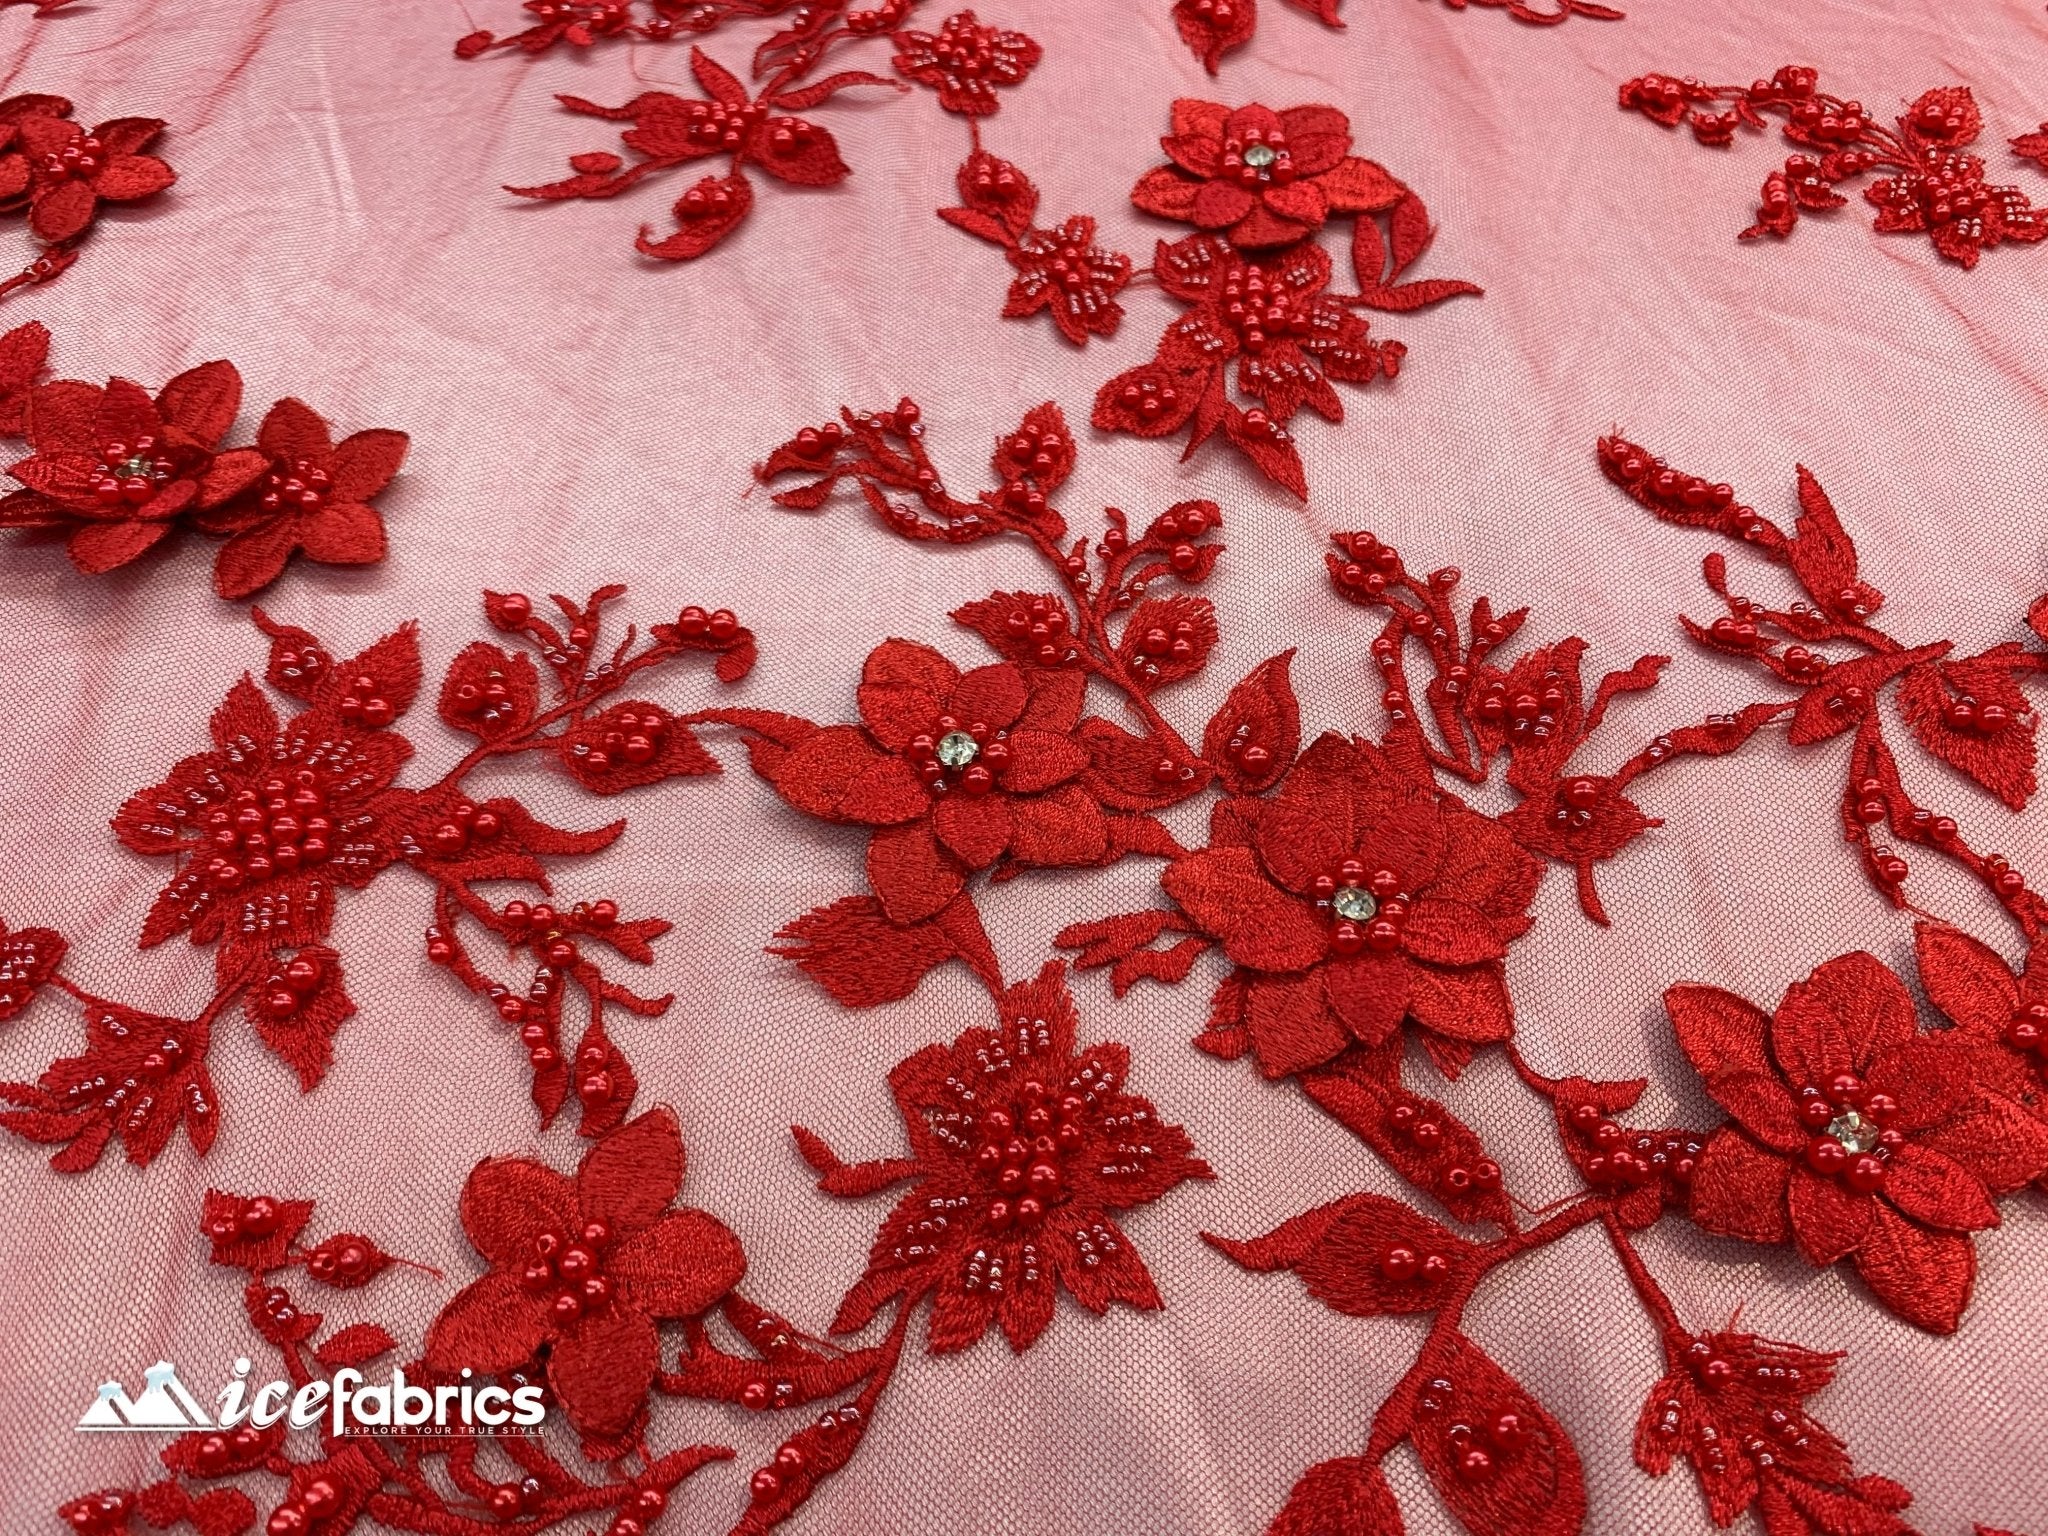 Flowers Embroidered Beaded Fabric/ Mesh Lace Fabric/ Bridal Fabric/